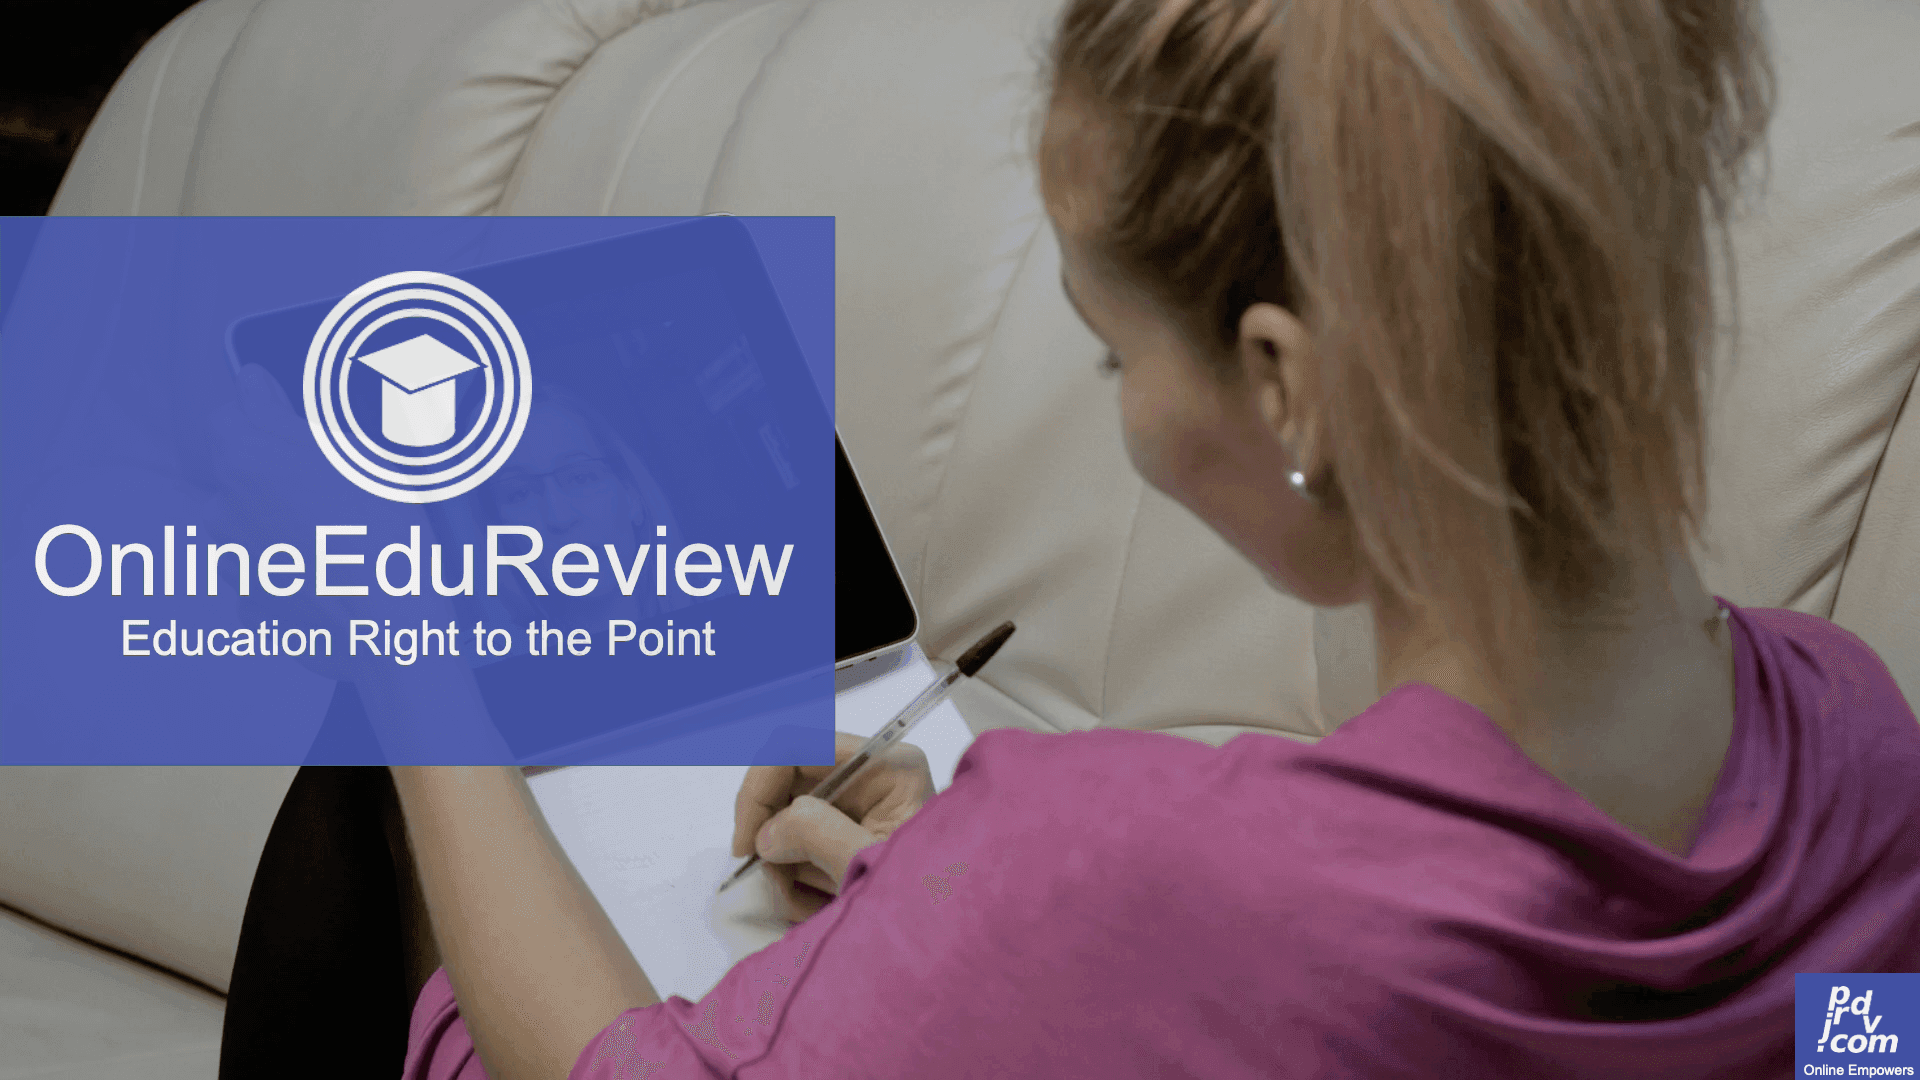 OnlineEduReview: Education Right to the Point